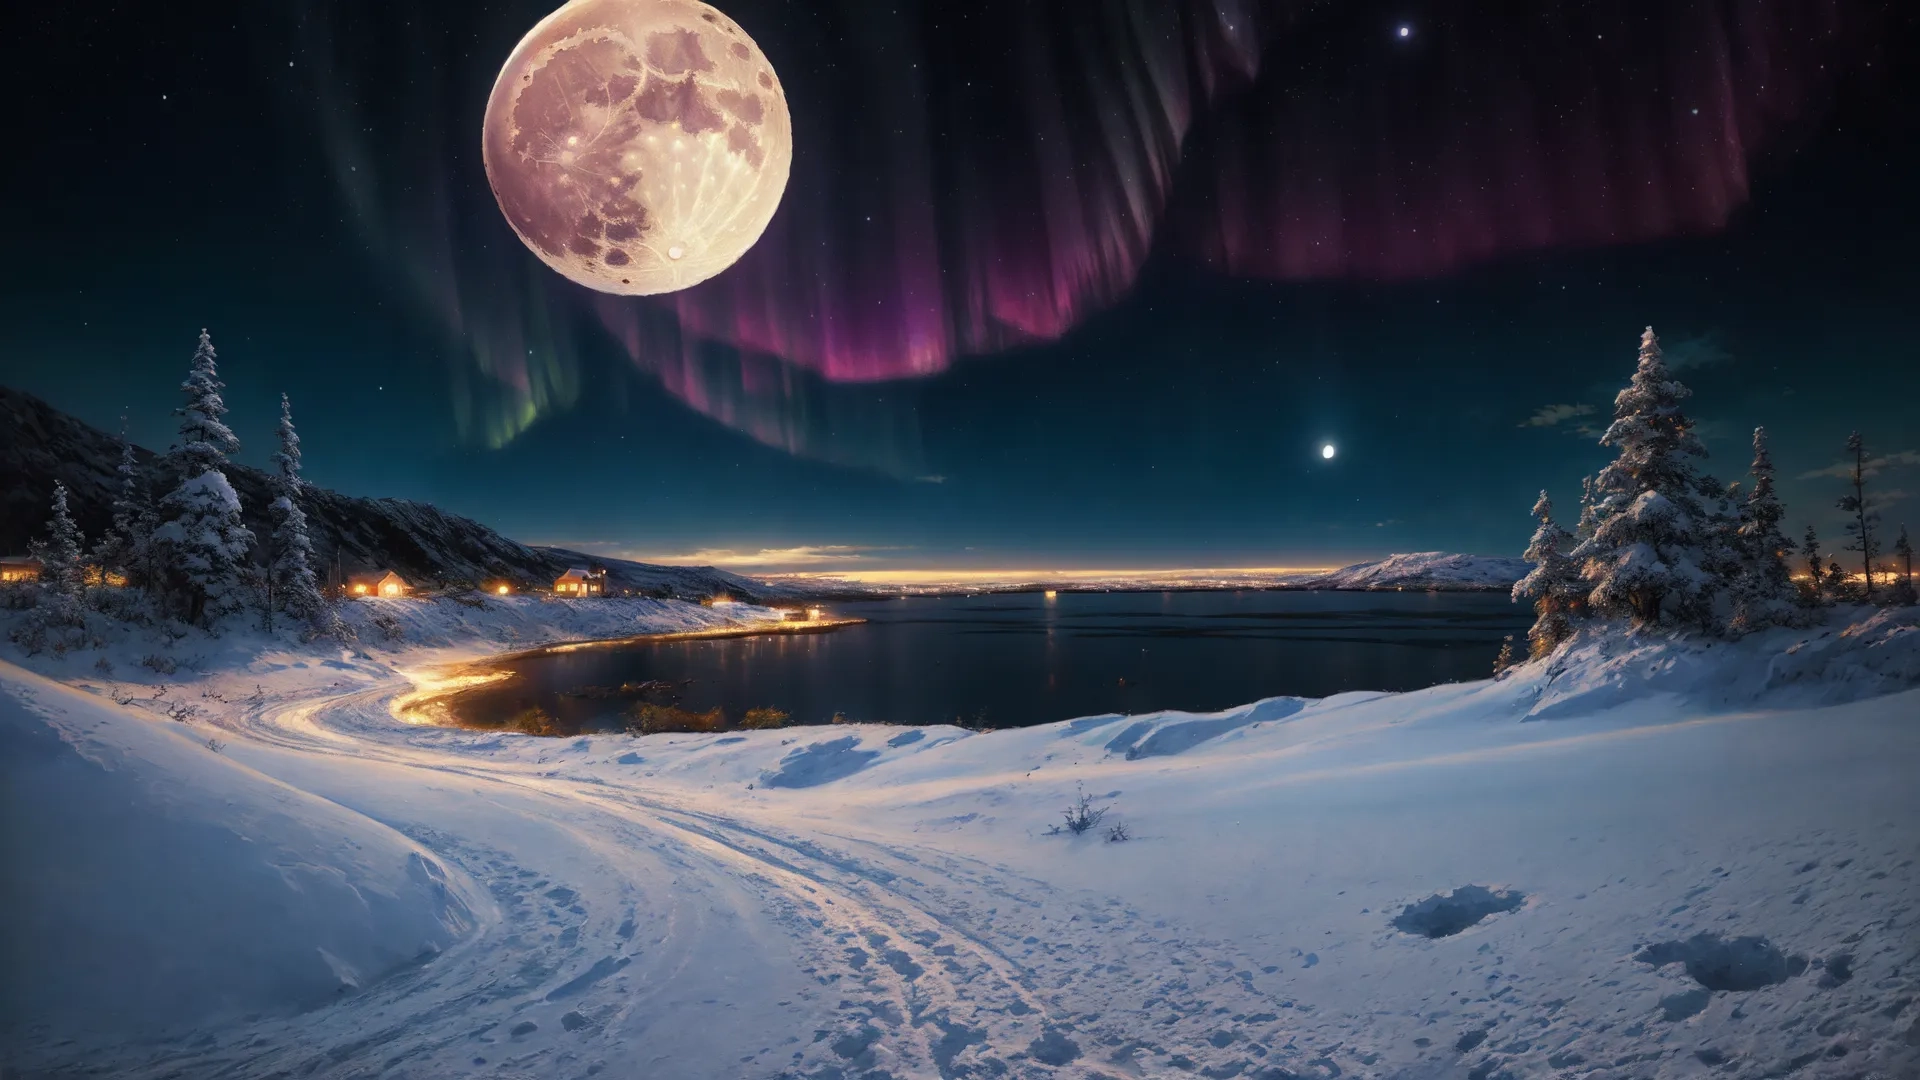 full moon set in a snowy landscape next to mountains and firs with green, pink and purple colored lights above the snow covered hills
